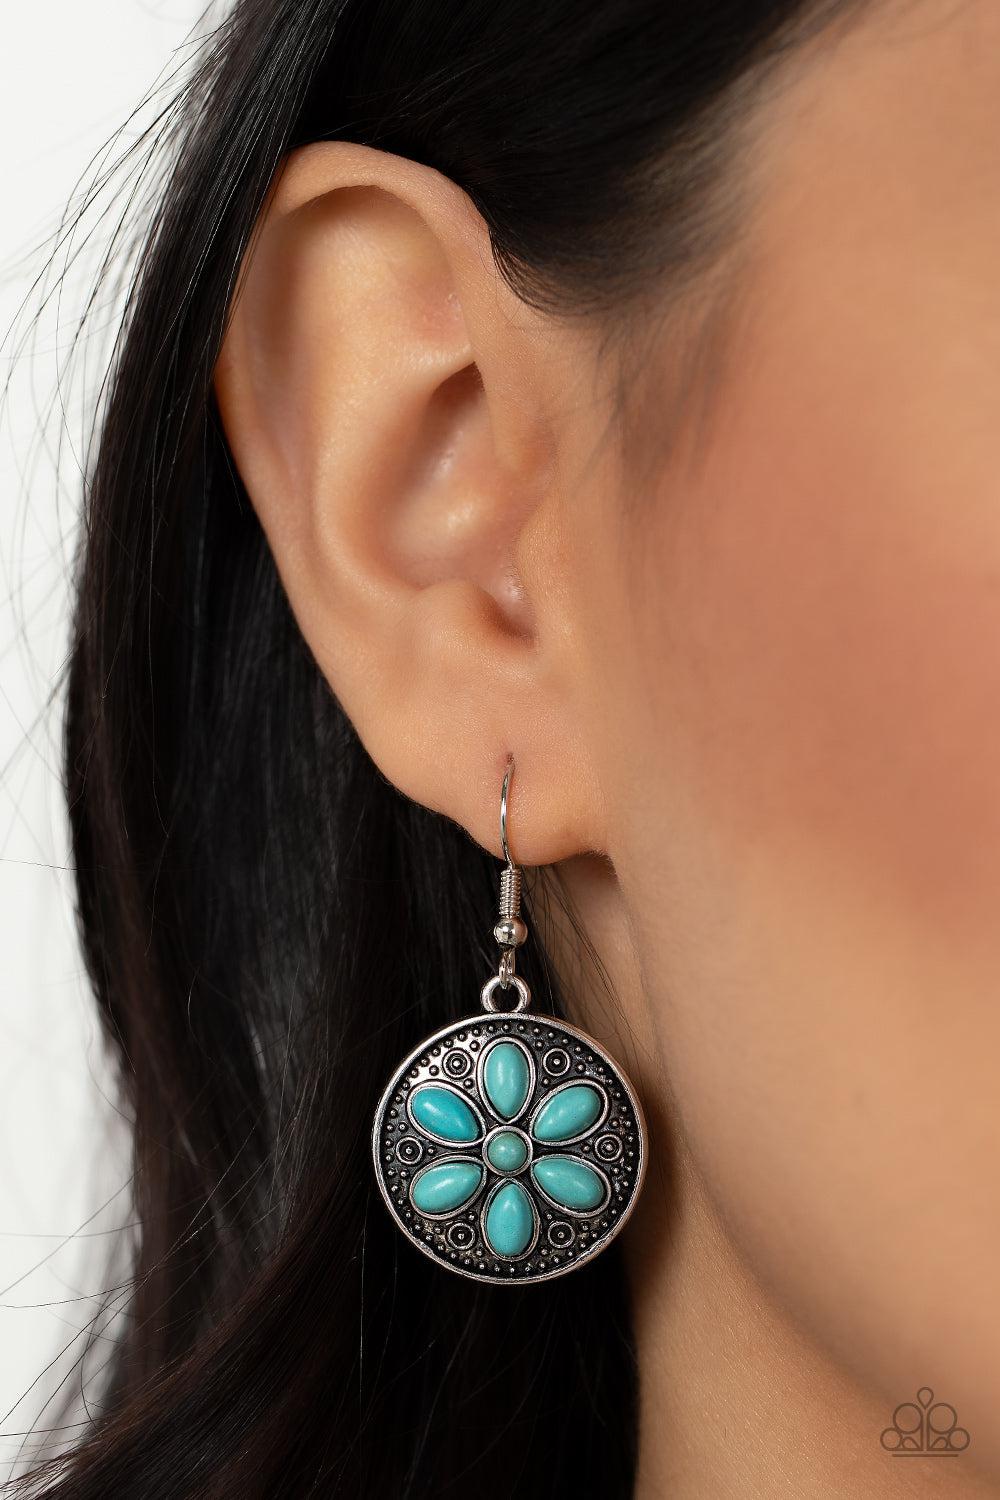 Saguaro Spring Turquoise Blue Stone Flower Earrings - Paparazzi Accessories-on model - CarasShop.com - $5 Jewelry by Cara Jewels